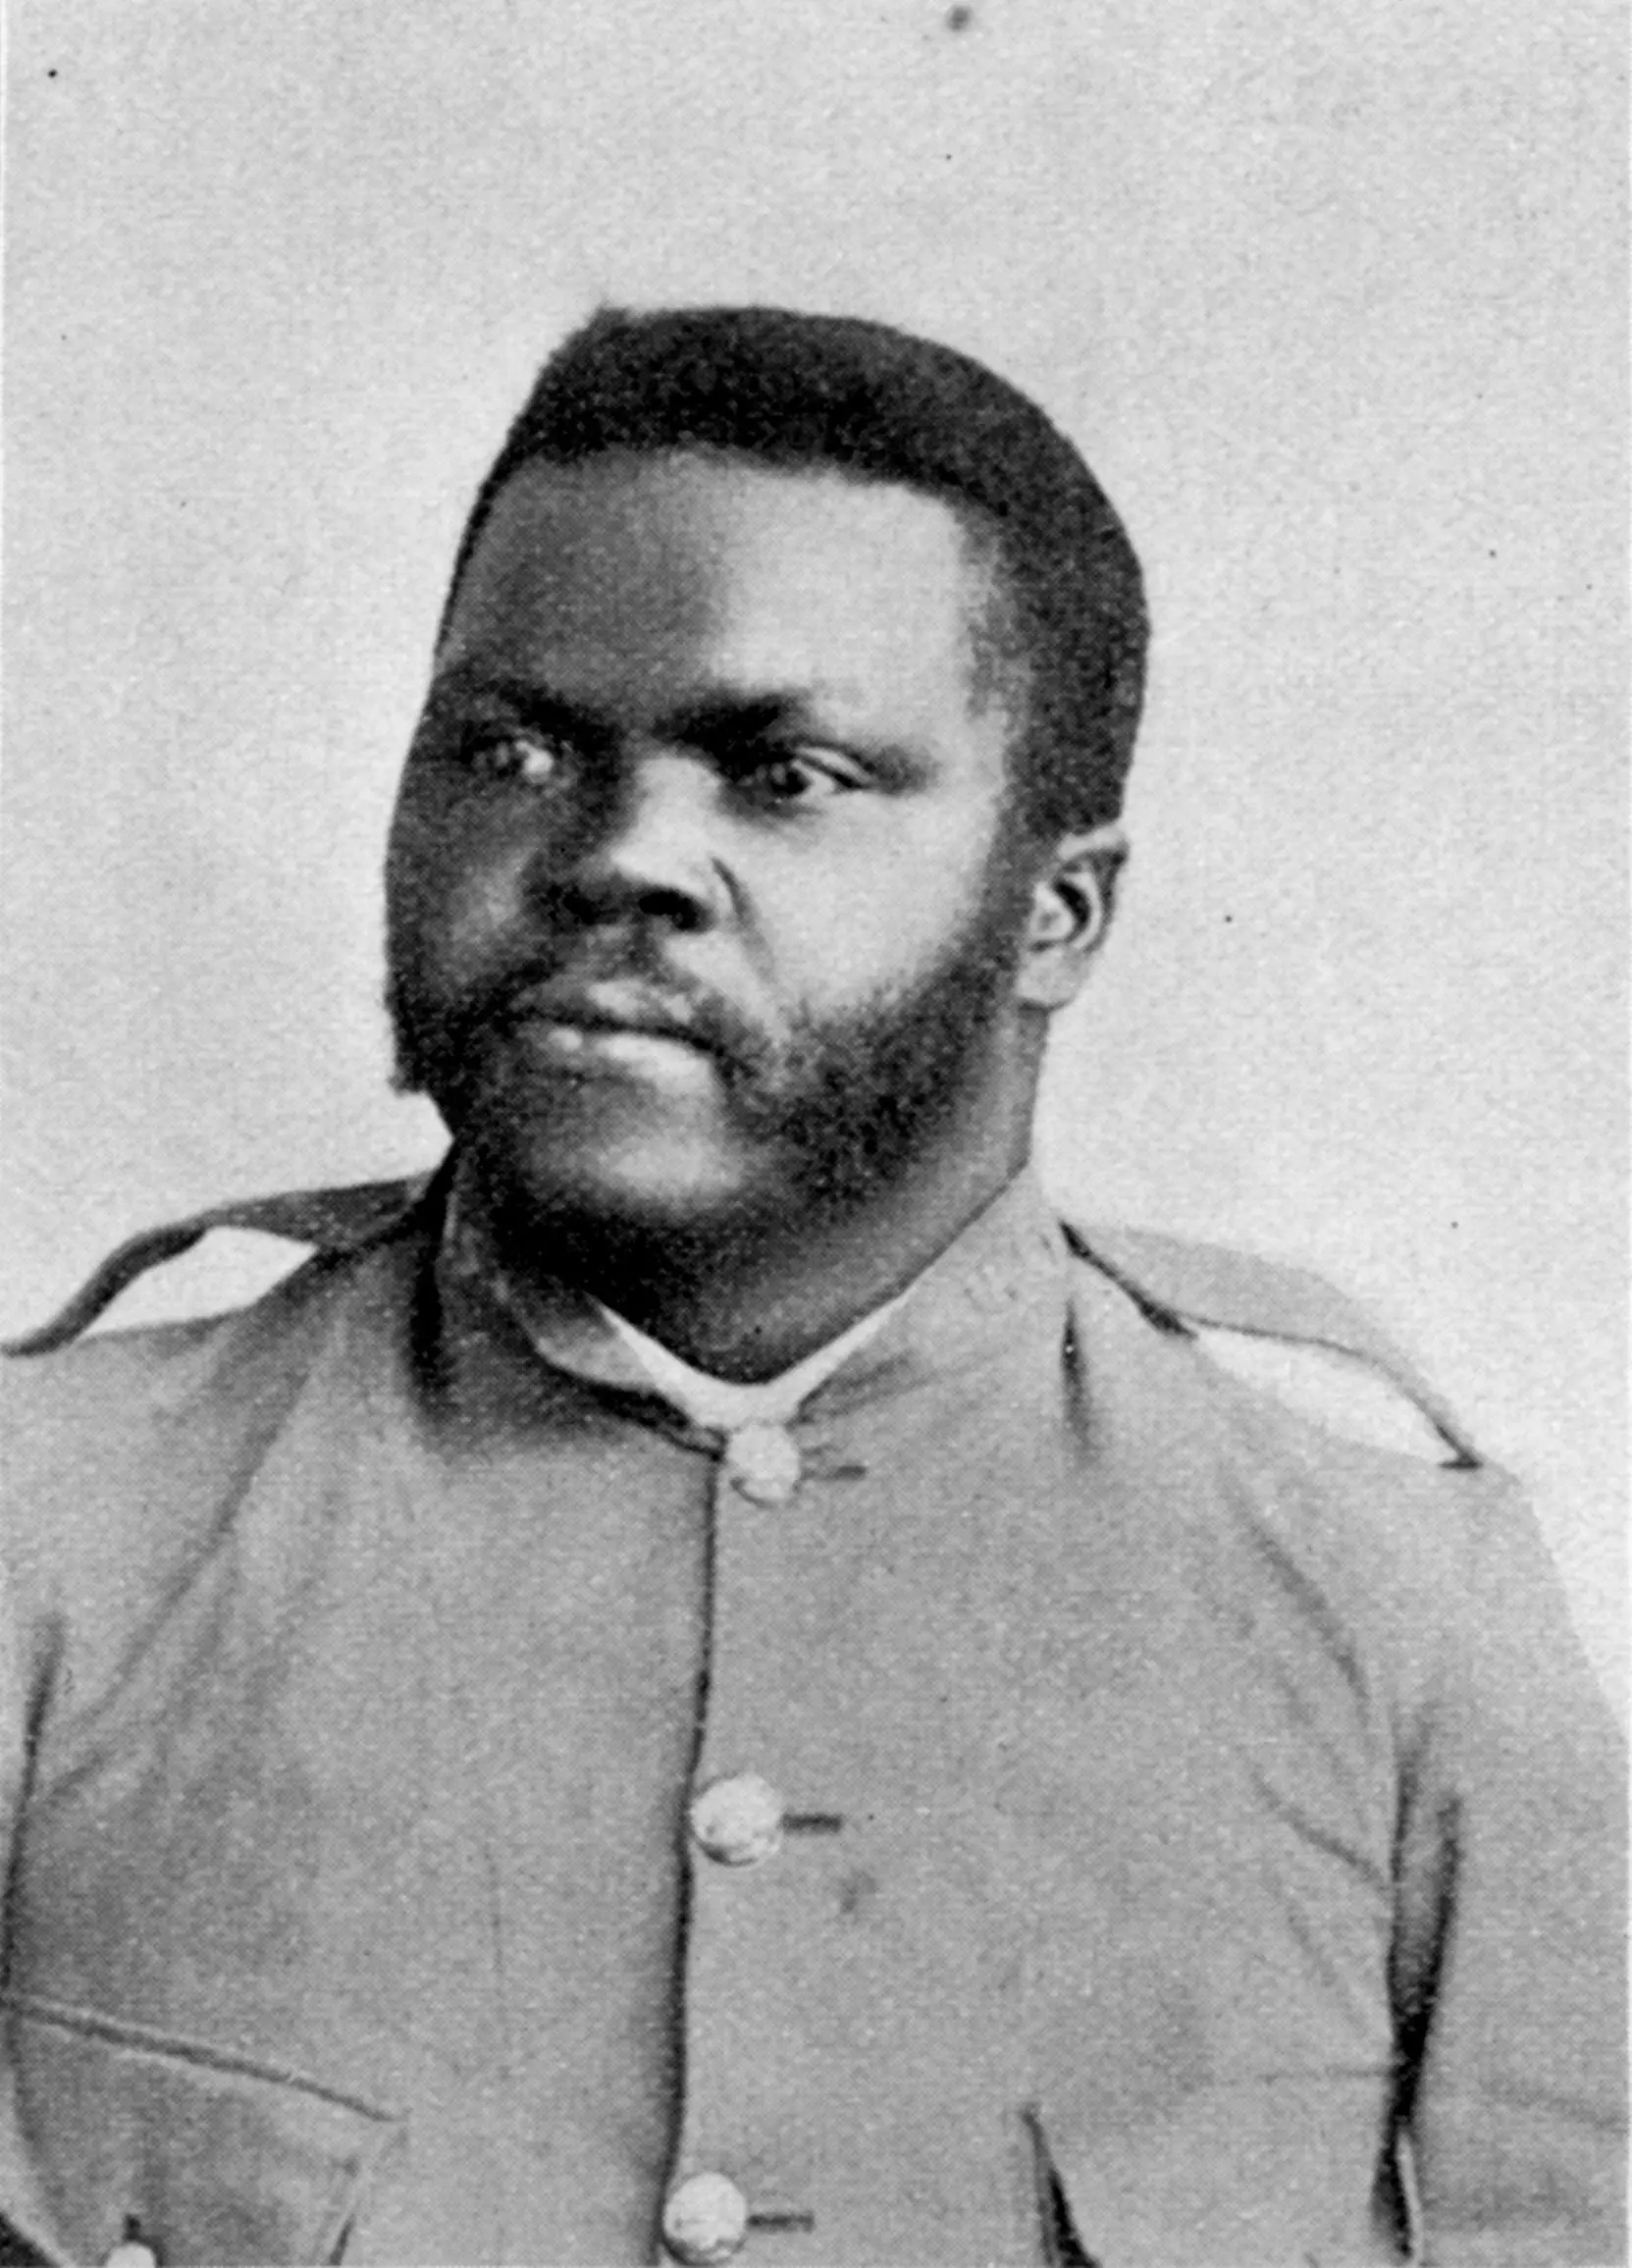 Black and white portrait of a young Black man in uniform. He has short black hair and a trimmed black beard and mustache.